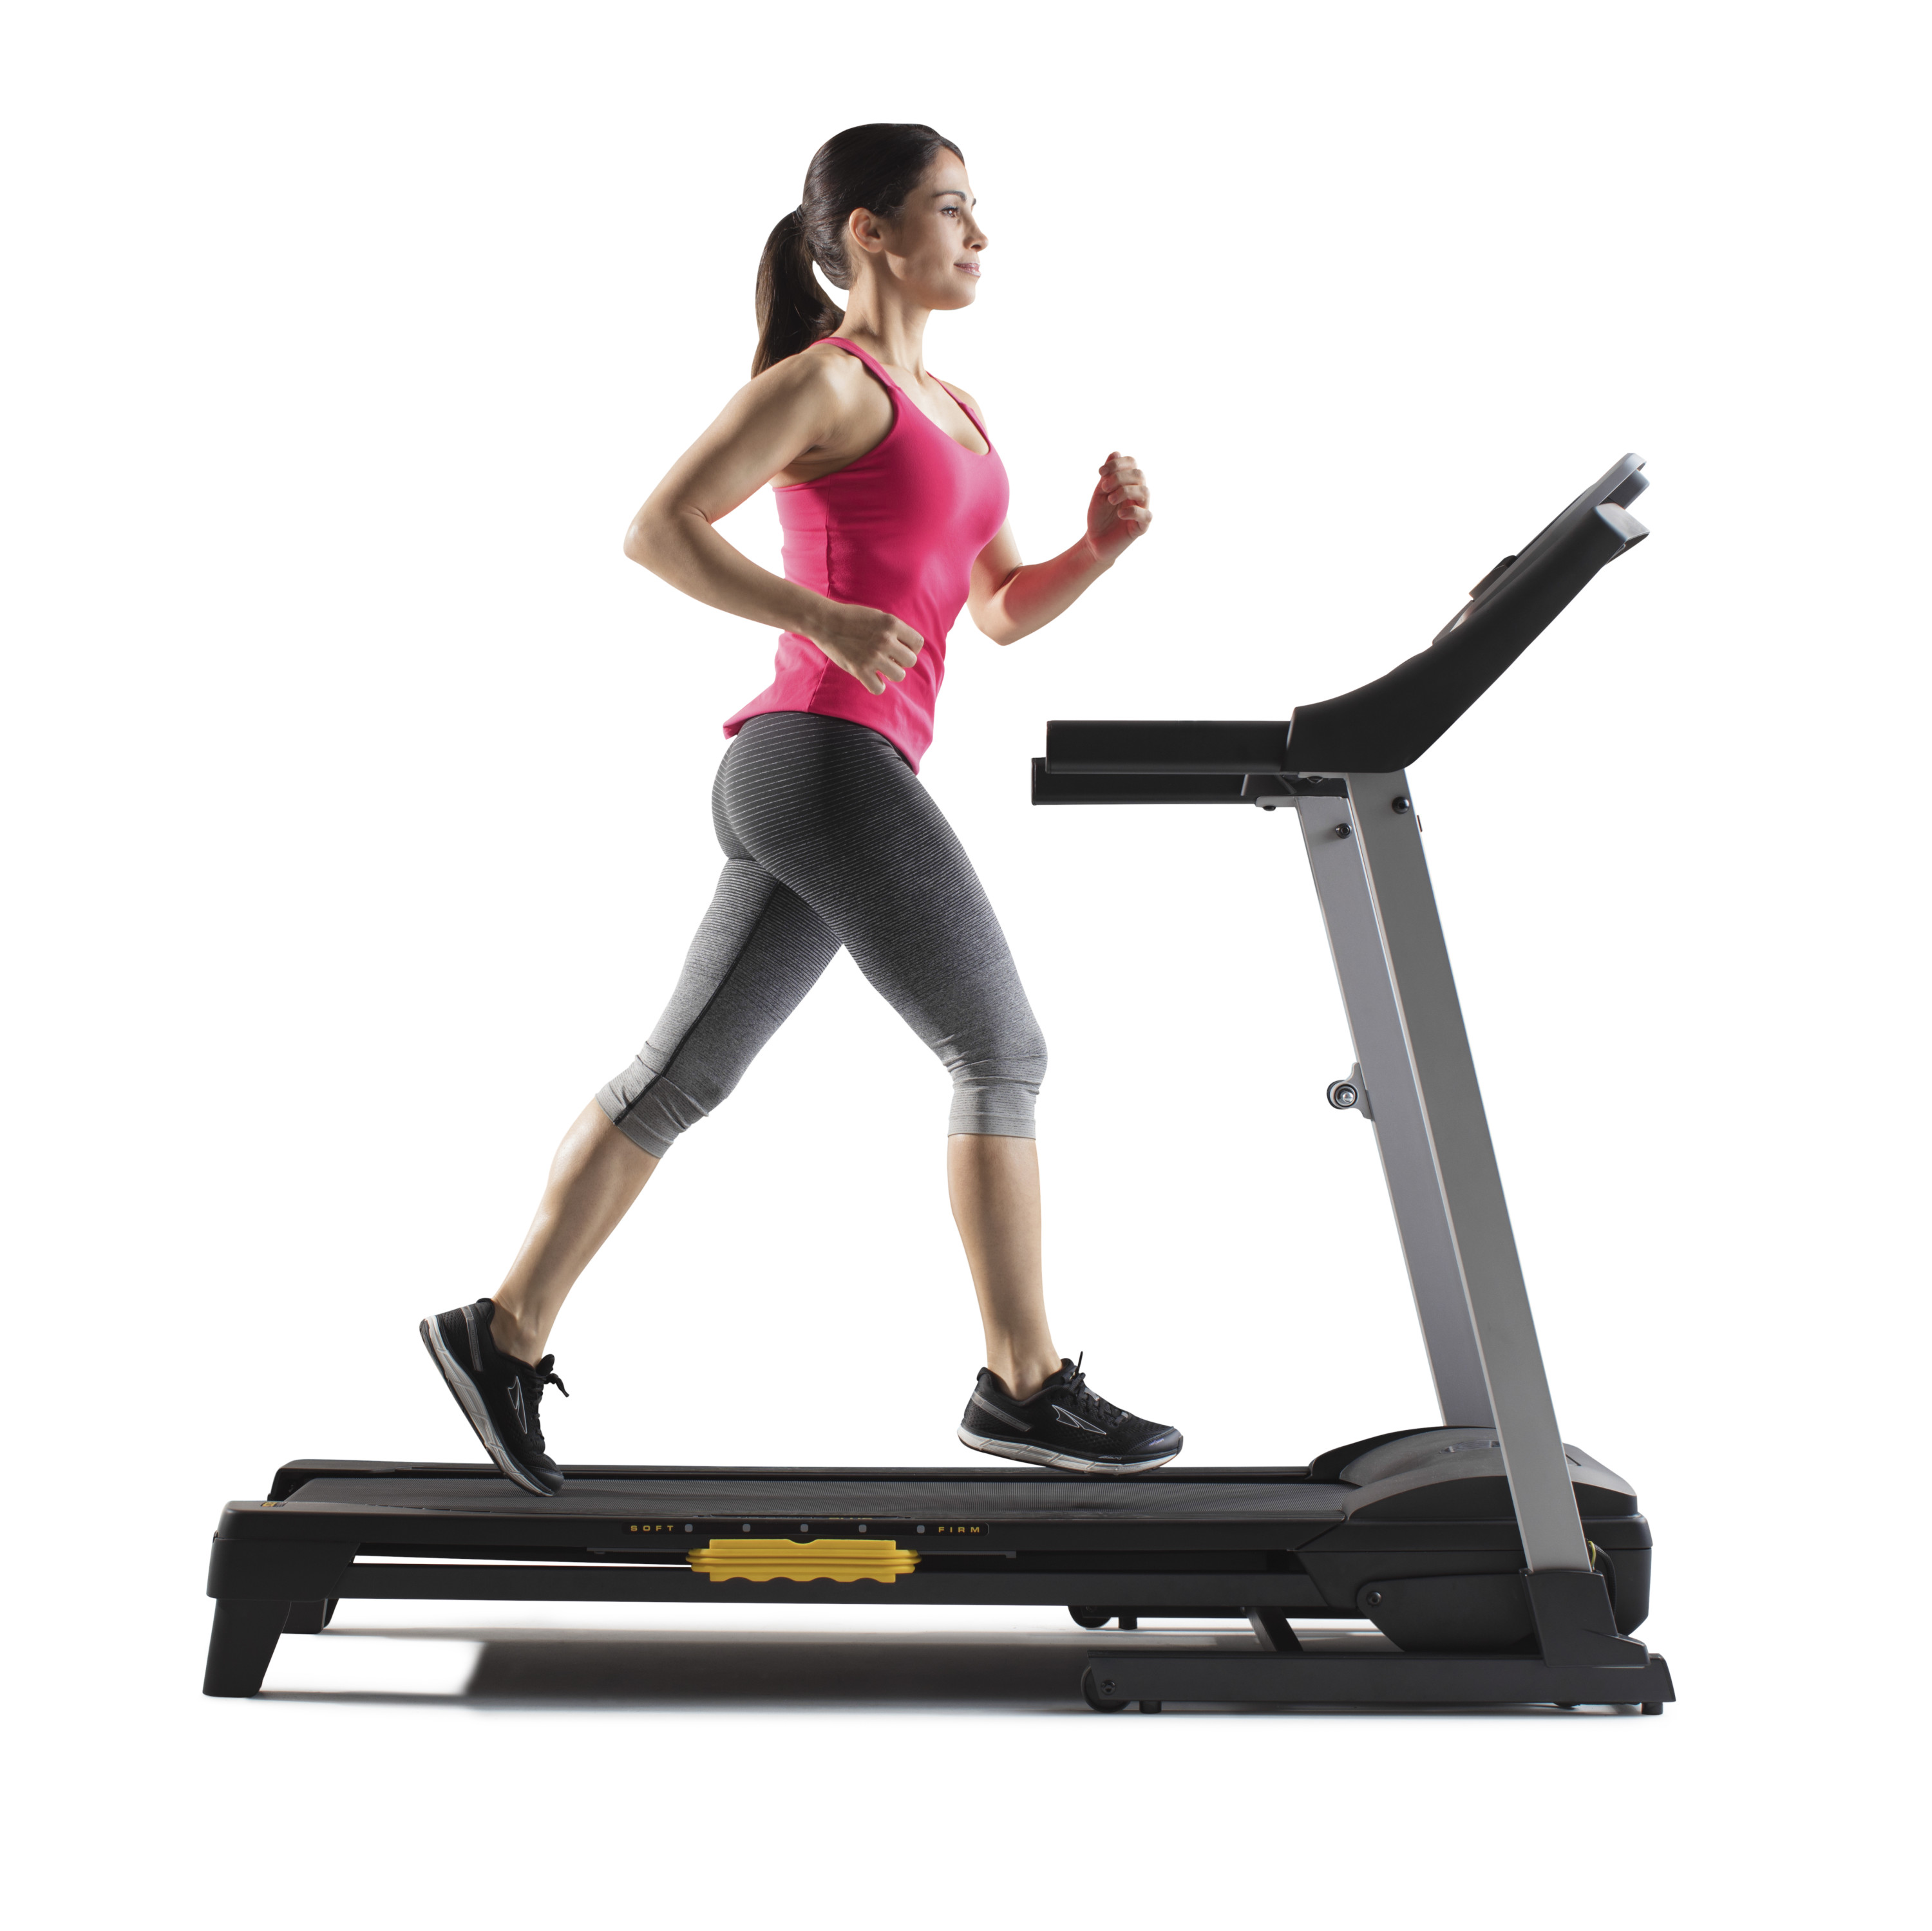 ProForm Trainer 430i Folding Smart Treadmill with 10% Incline, iFit Bluetooth Enabled - image 12 of 18